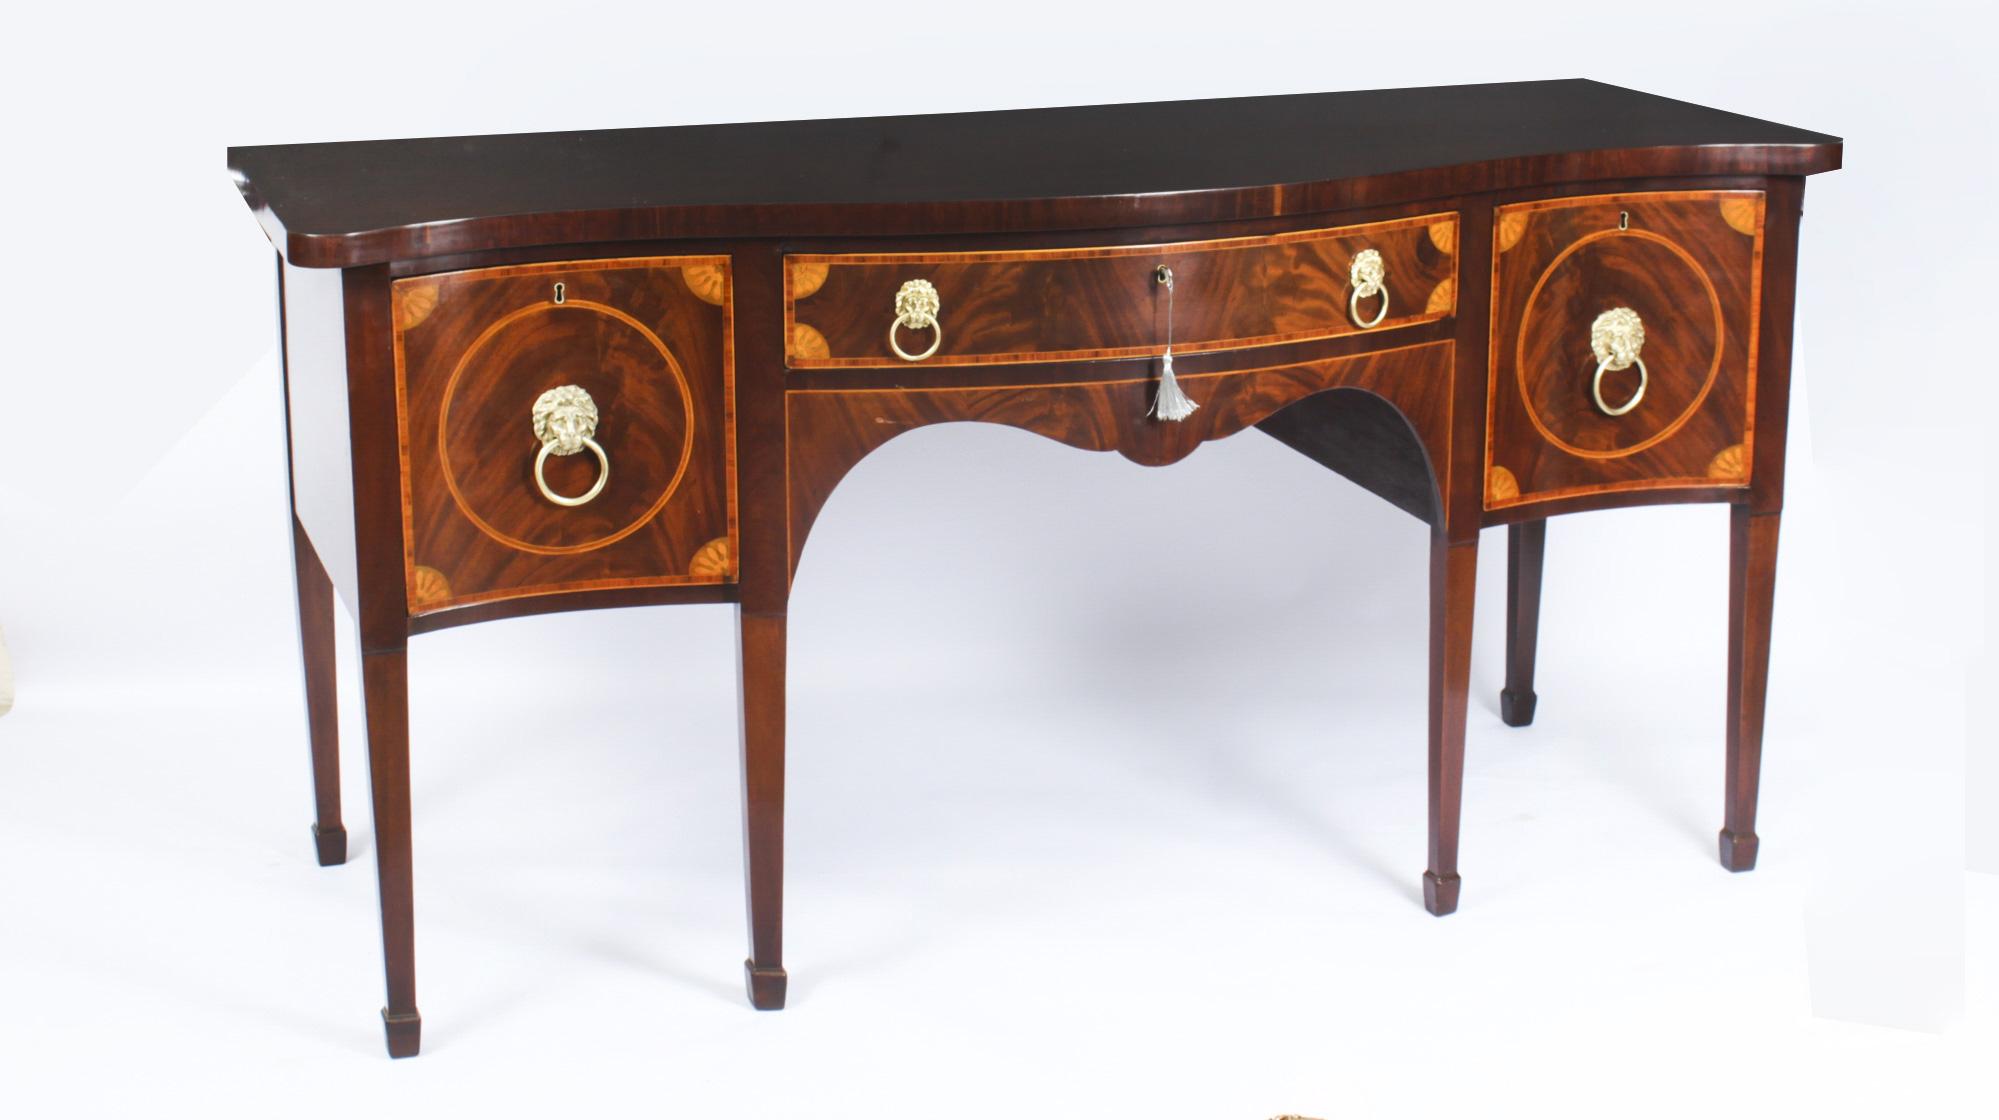 Antique George III Flame Mahogany Serpentine Sideboard, 18th Century For Sale 14